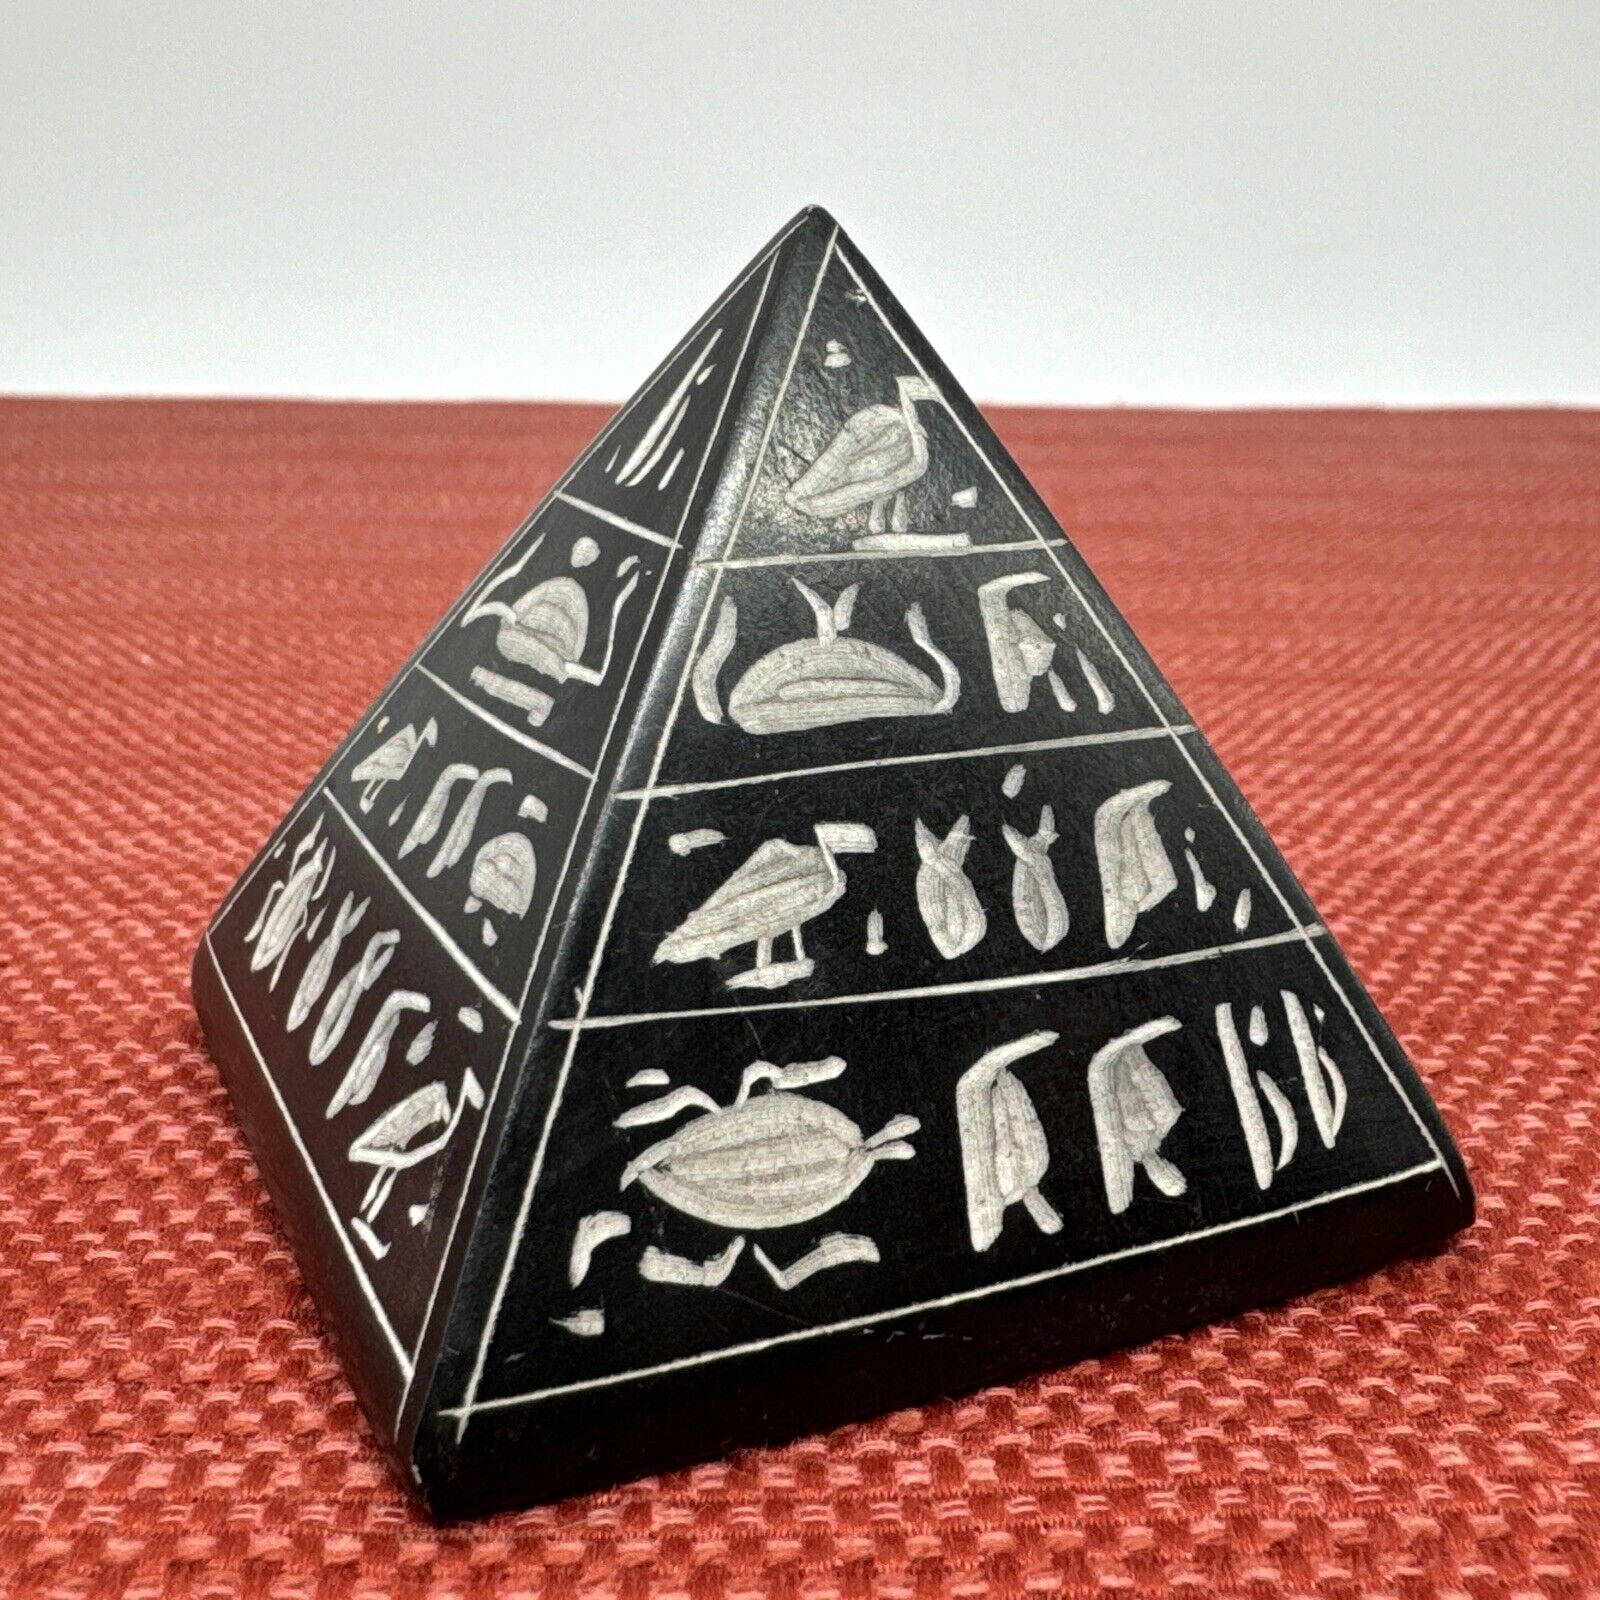 Egyptian Hieroglyph Pyramid Hand Carved Basalt Stone Paperweight Statue